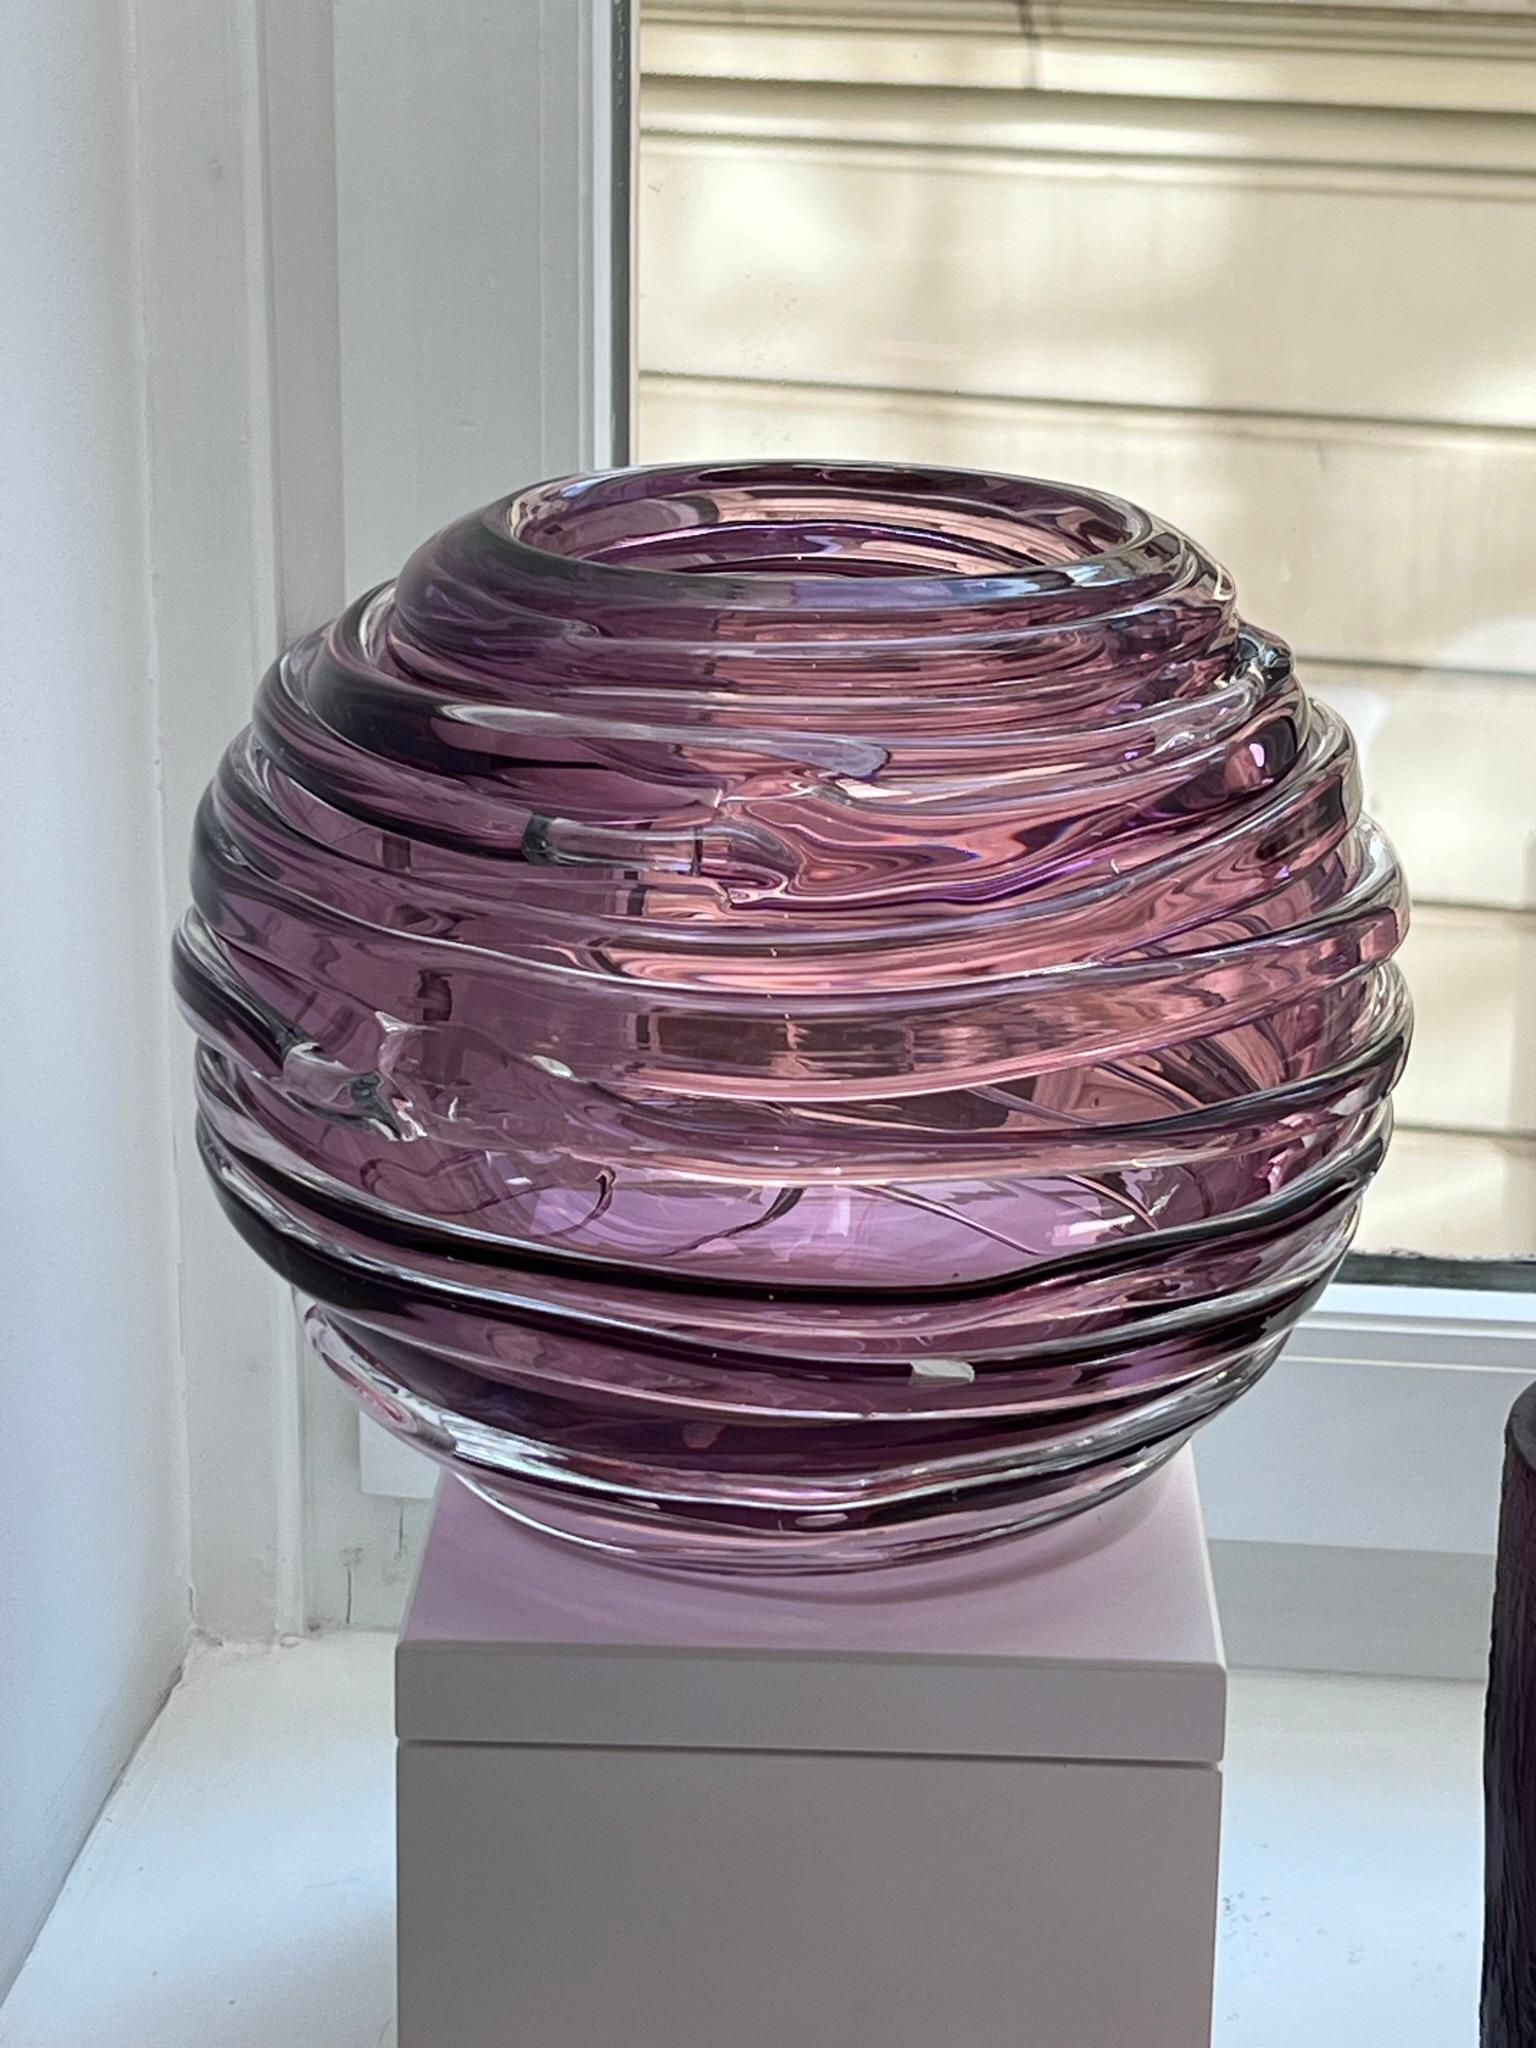 Mouth blown glass vase completely hand-crafted. Amethyst color with ribbed details.
21 cm / 8.25' diameter perfect size for everyday flowers and even beautiful when empty as a sculpture that will enhance the exquisite design detail.

Mouth opening